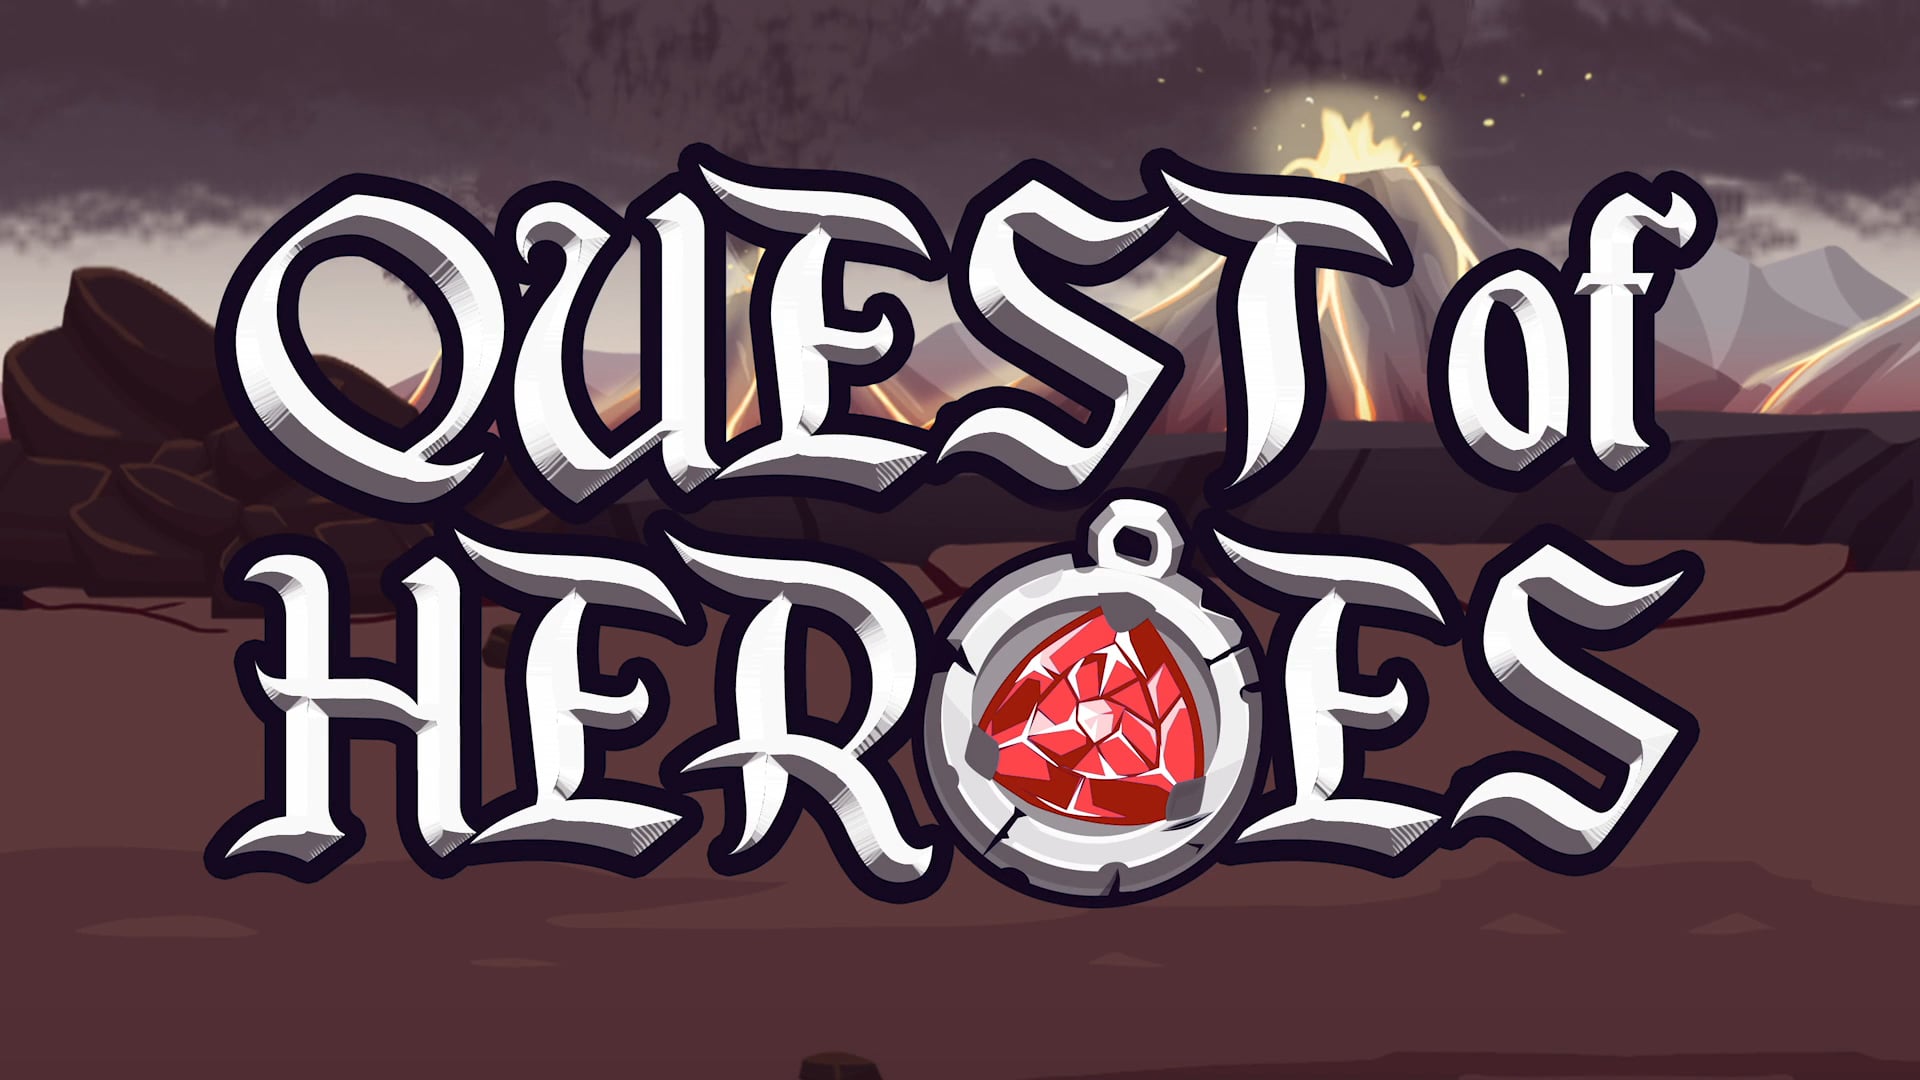 Quest of Heroes Promo